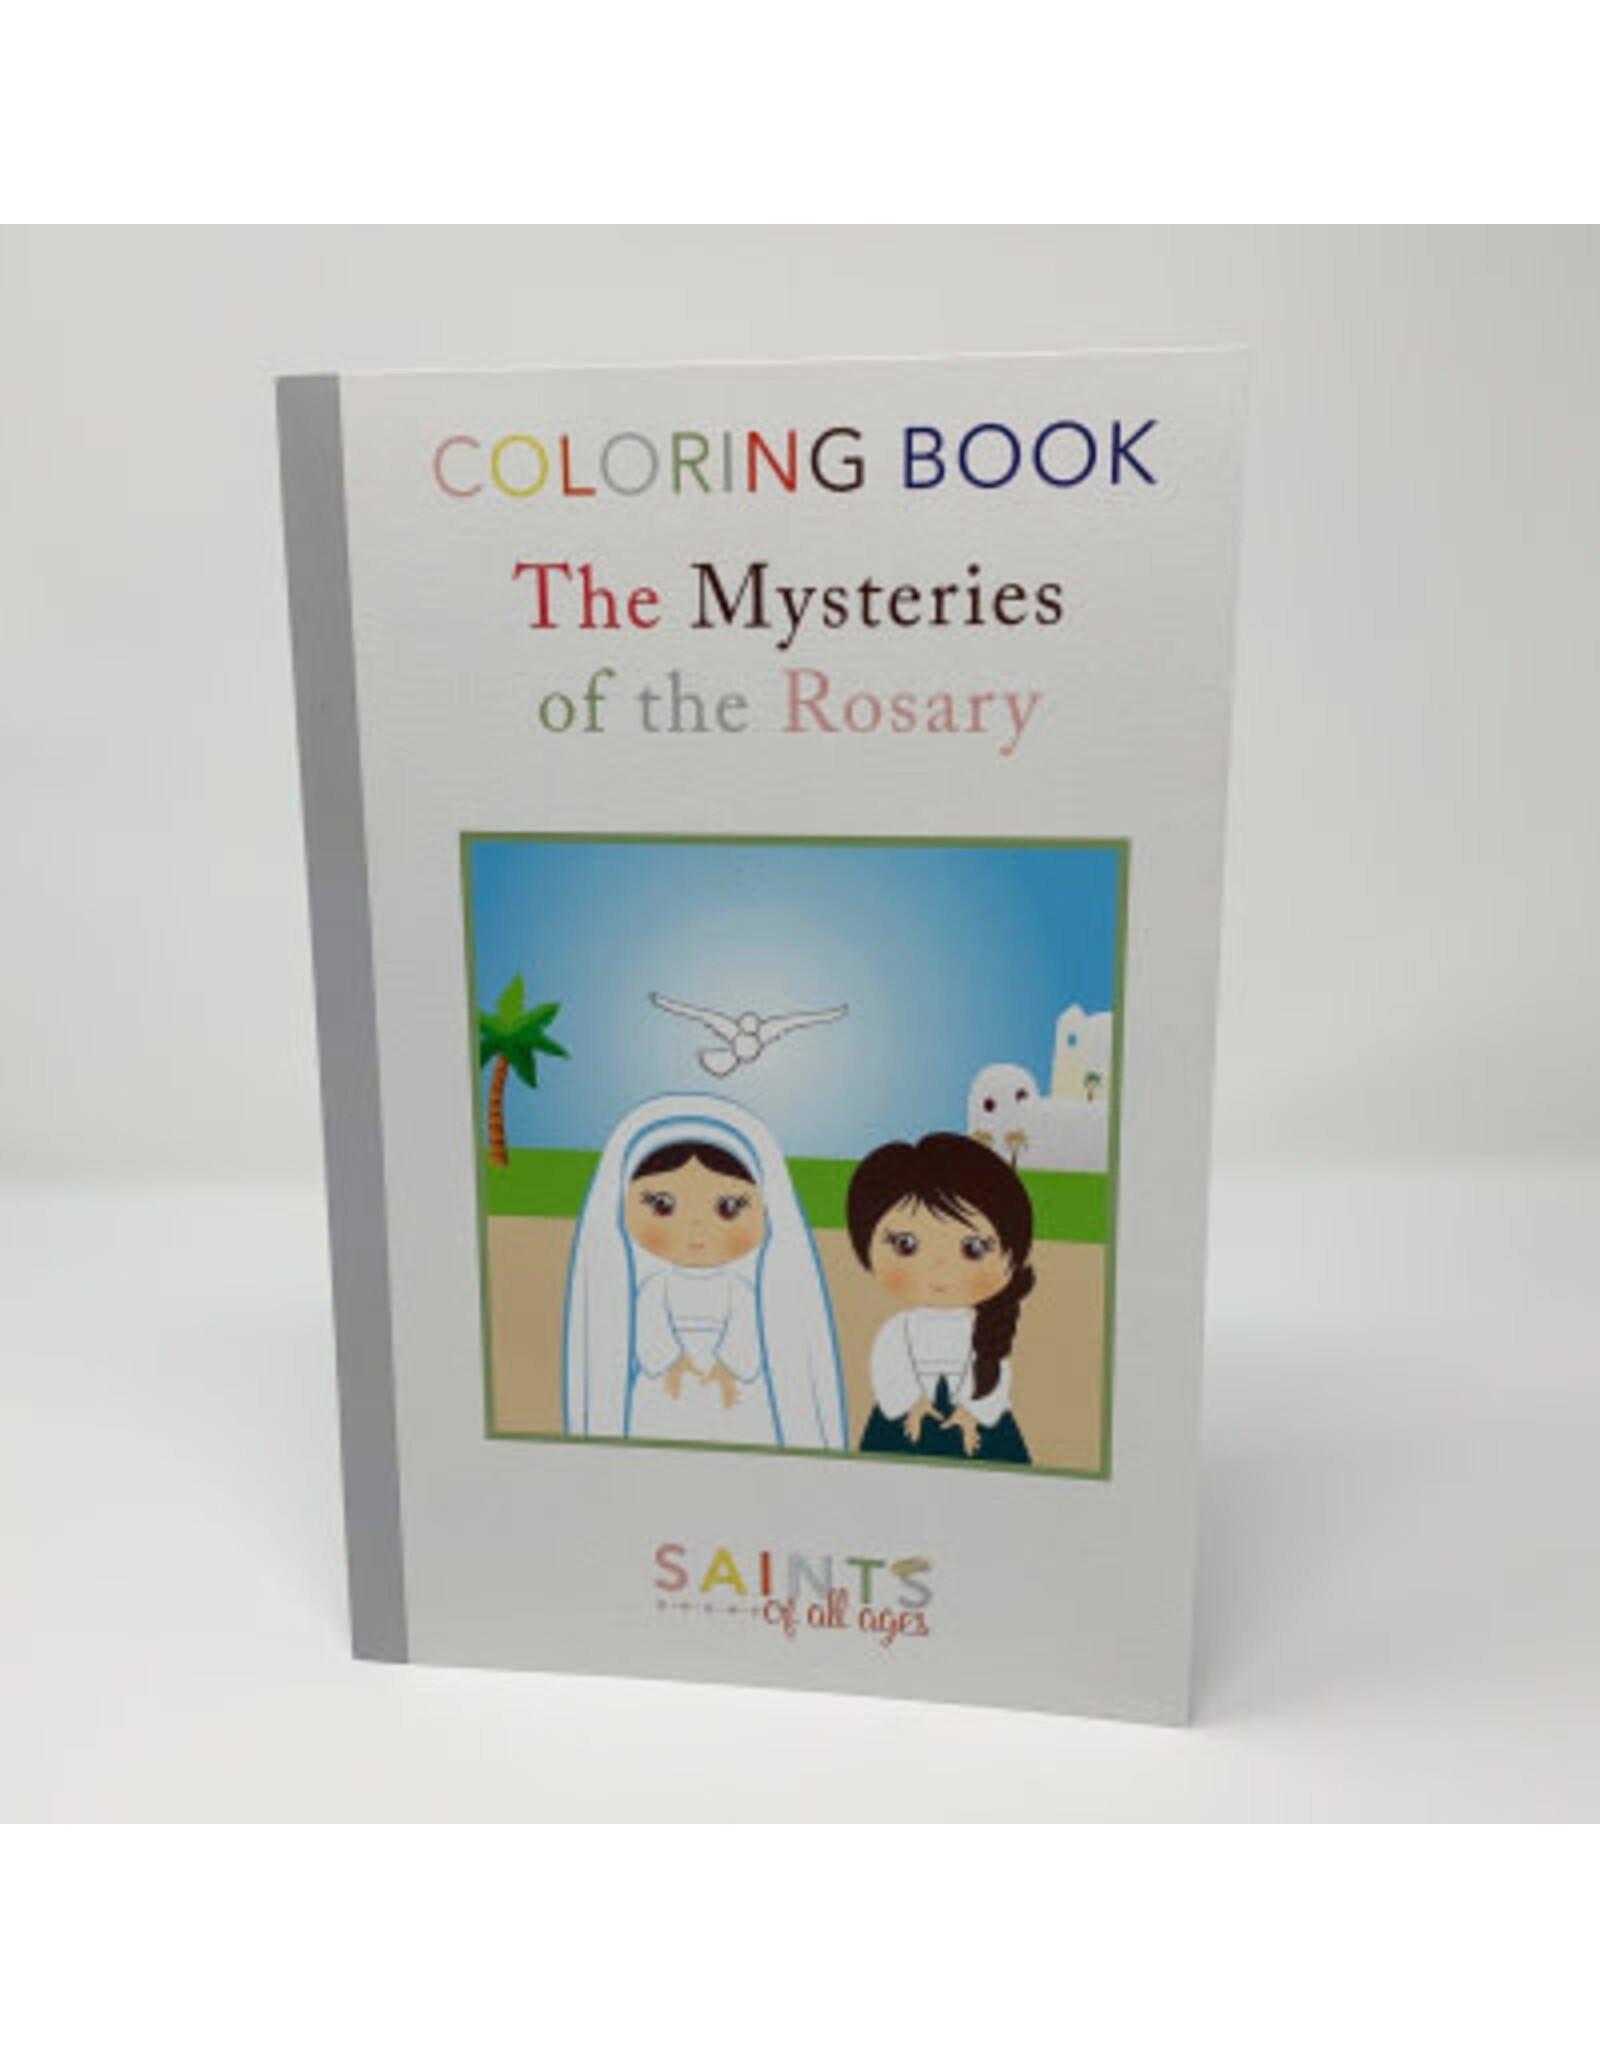 Meyer Market Designs Coloring Book - Mysteries of the Rosary